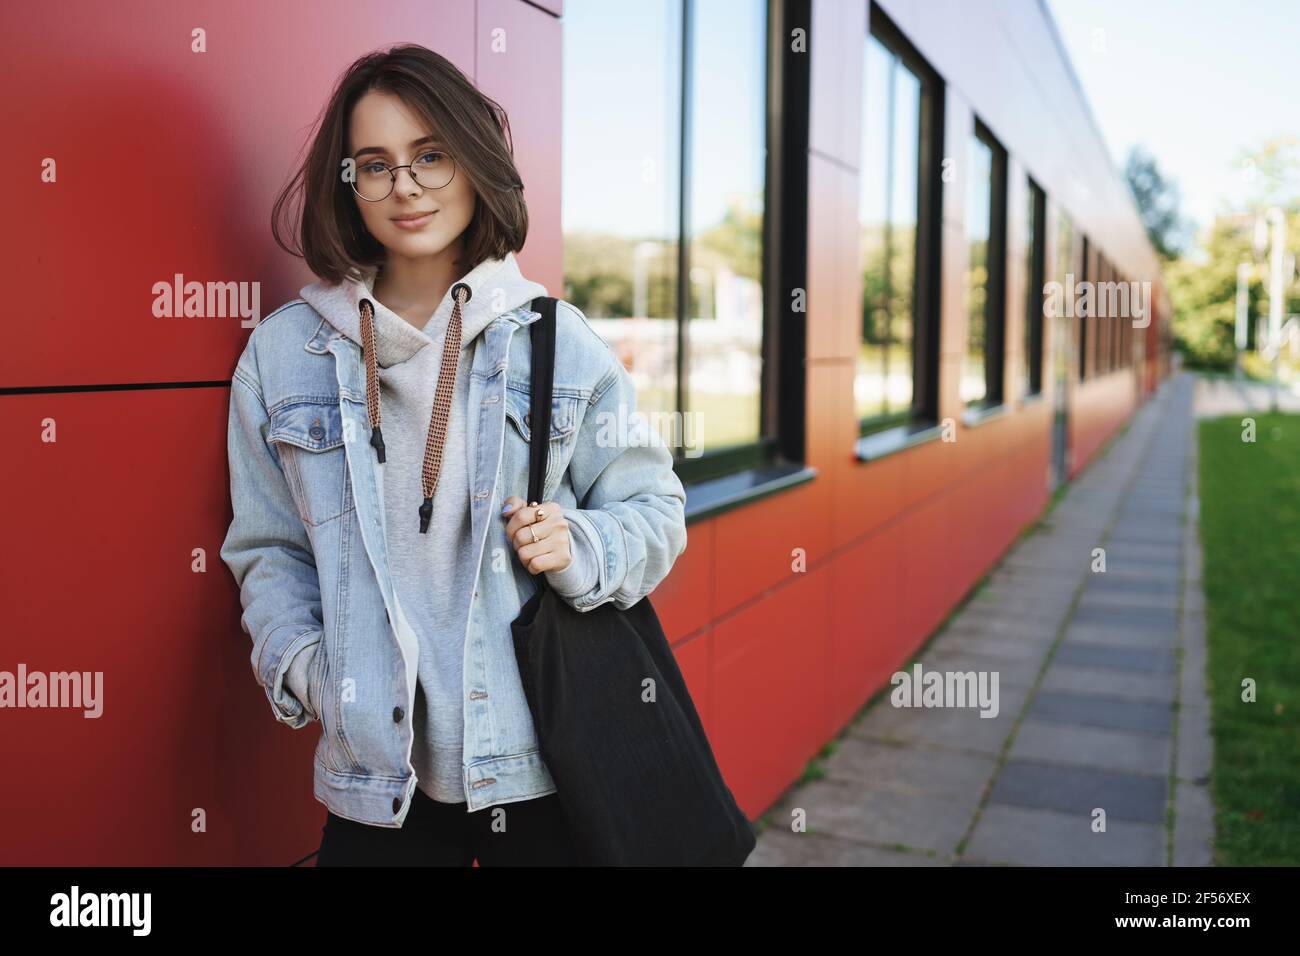 Young stylish queer girl, college student leaning on wall, holding tote-bag, smiling looking at camera, walking outdoors after classes finished Stock Photo